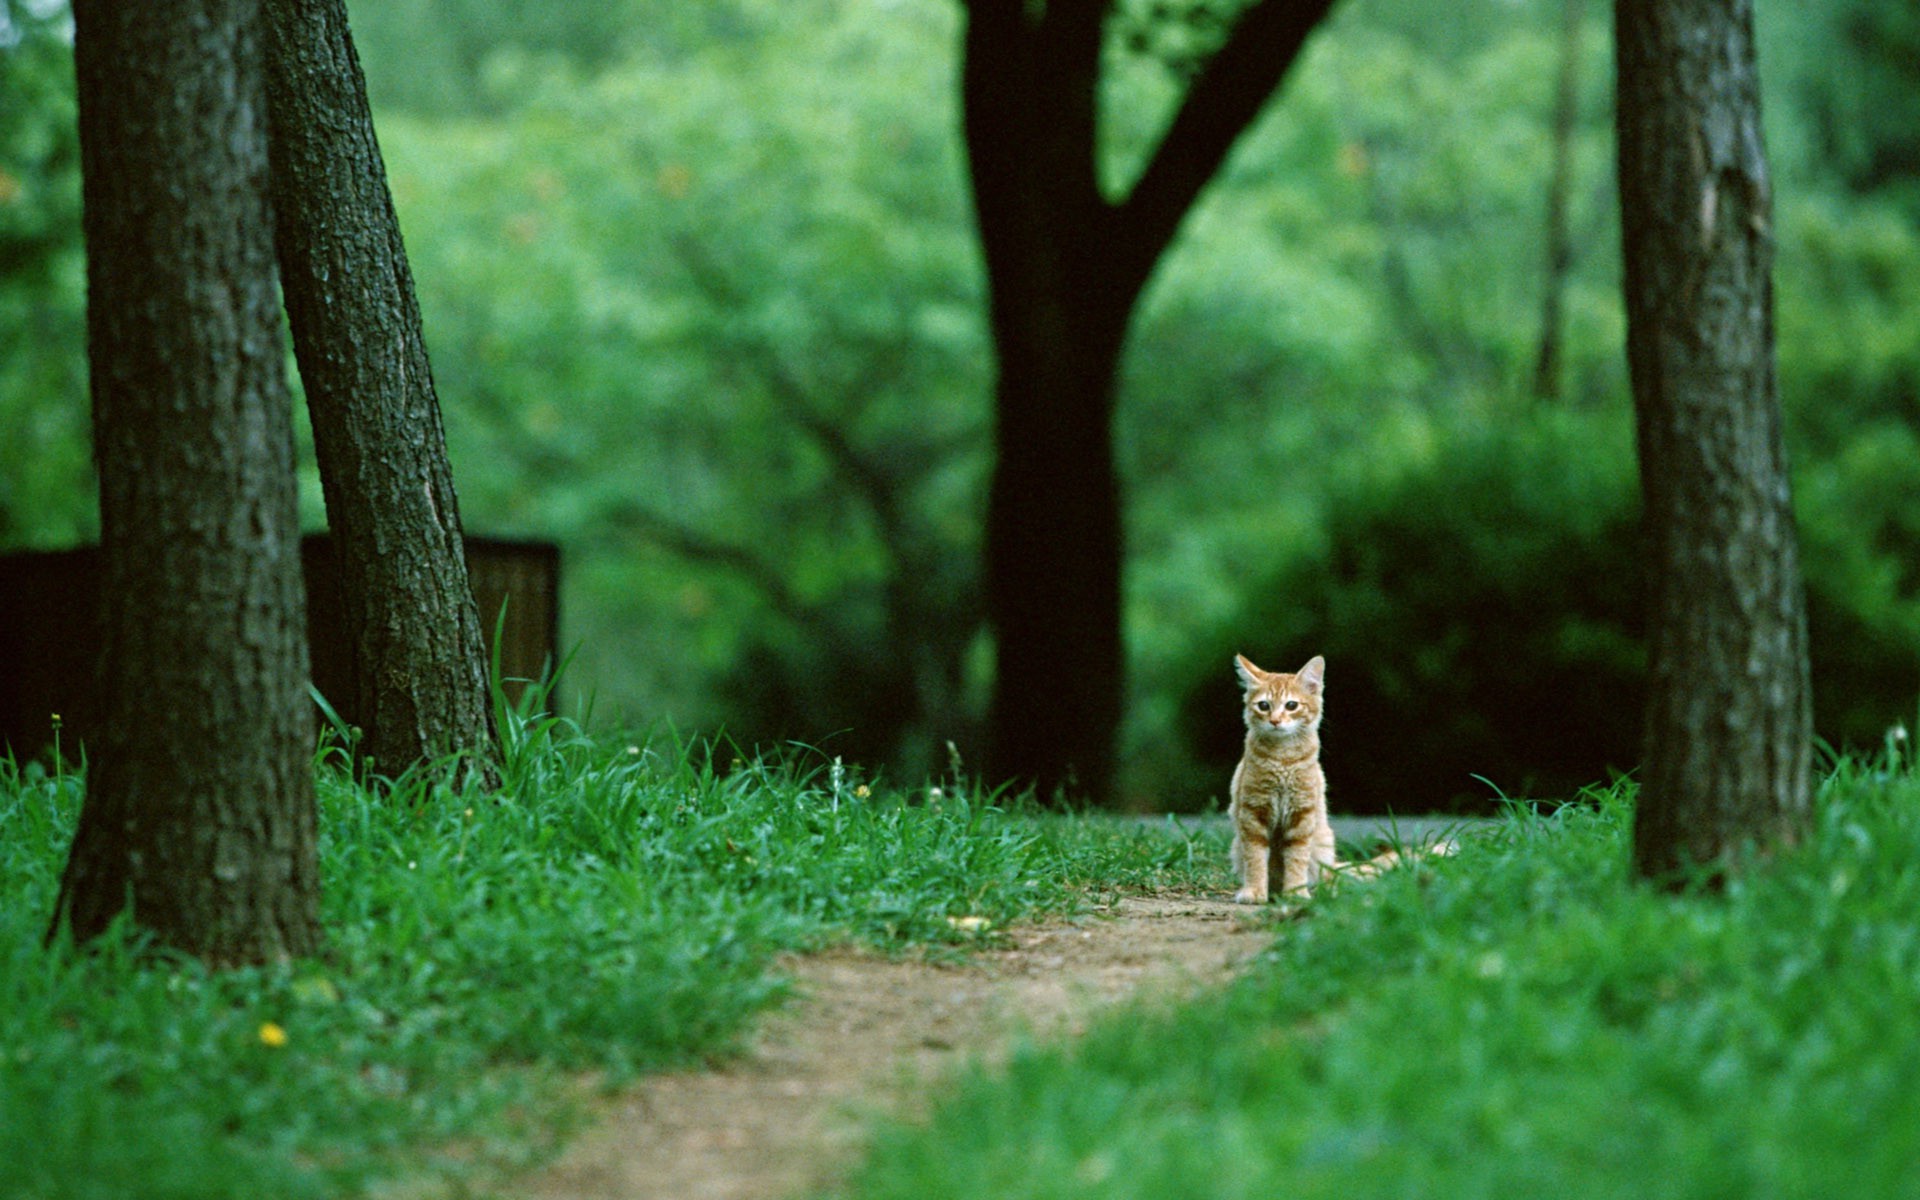 A red kitten sits on a path in the park